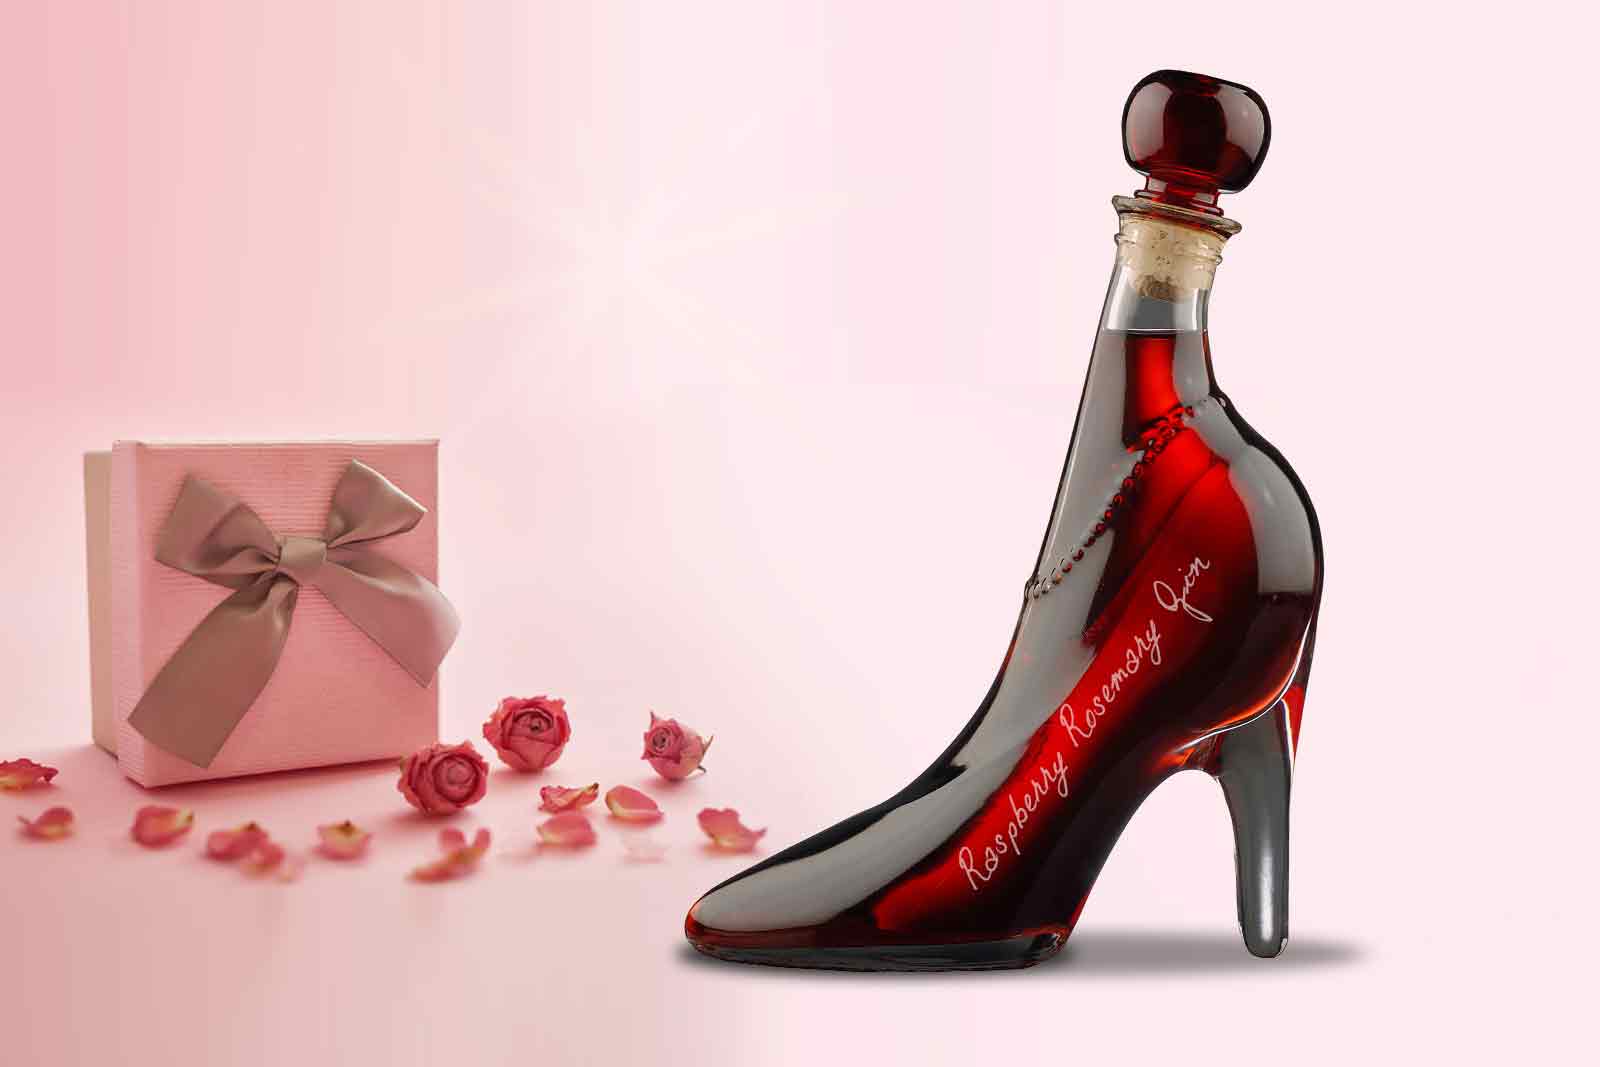 Lady Shoe with RASPBERRY, ROSEMARY GIN